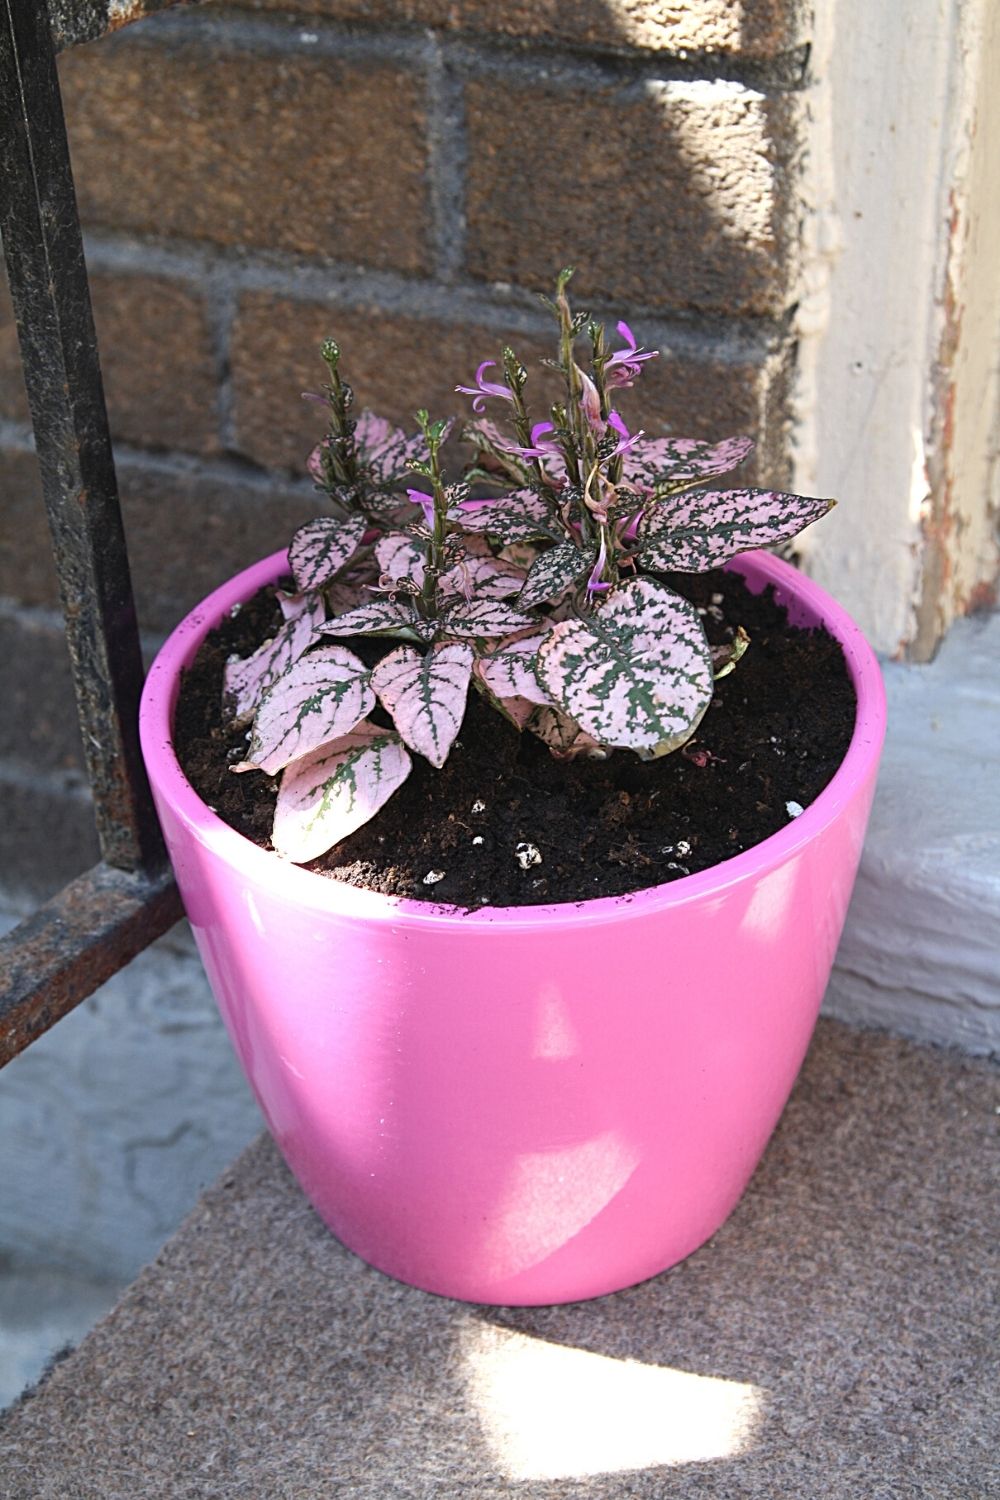 Polka Dot Plant, aka Freckle Plant, is another colorful plant to grow in a terrarium